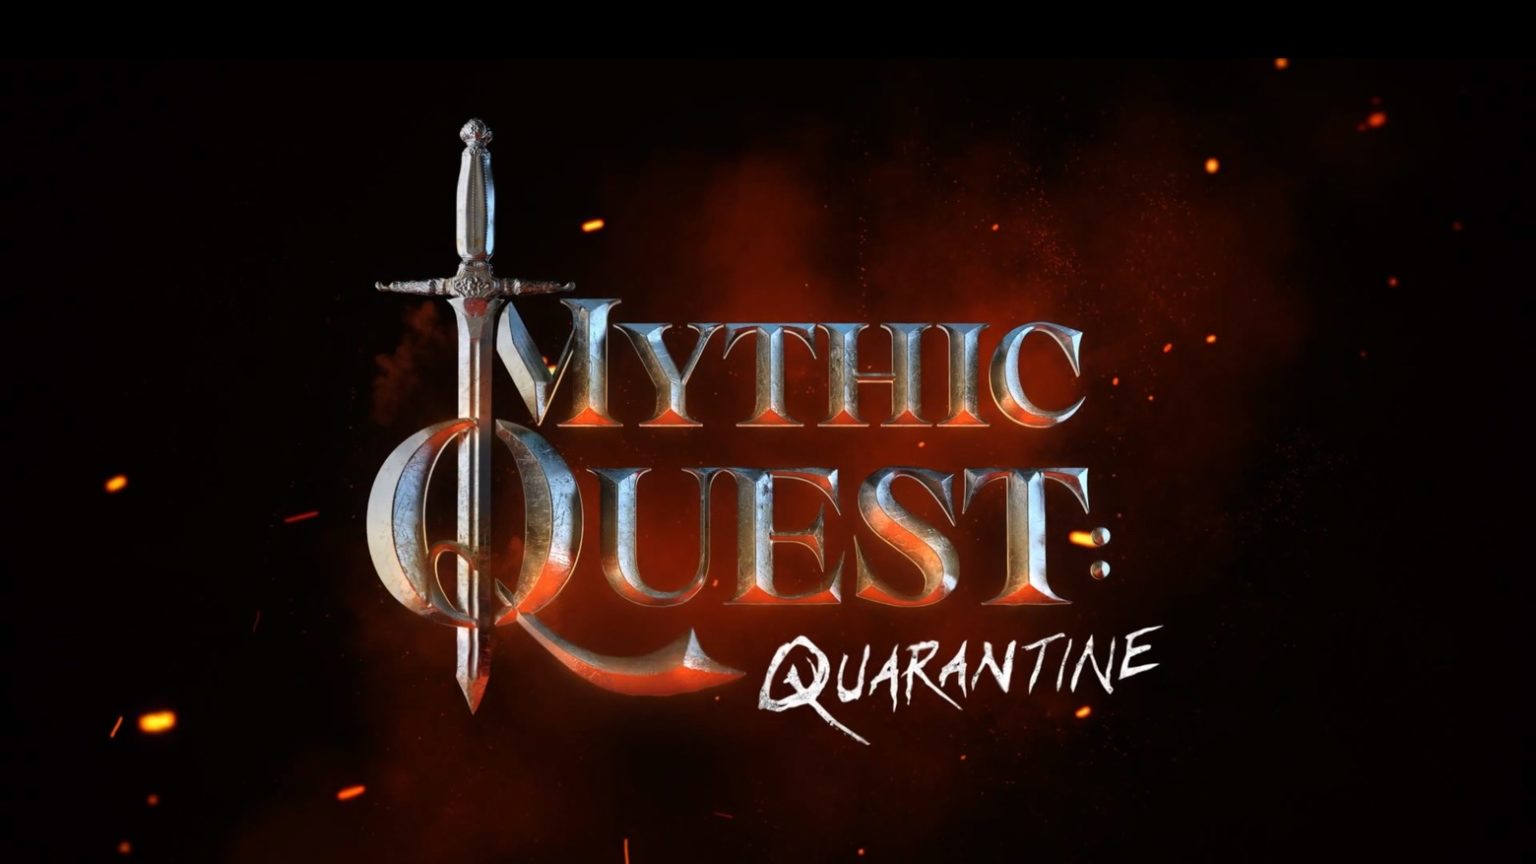 Mythic Quest: Quarantine“ is coming to Apple TV+.